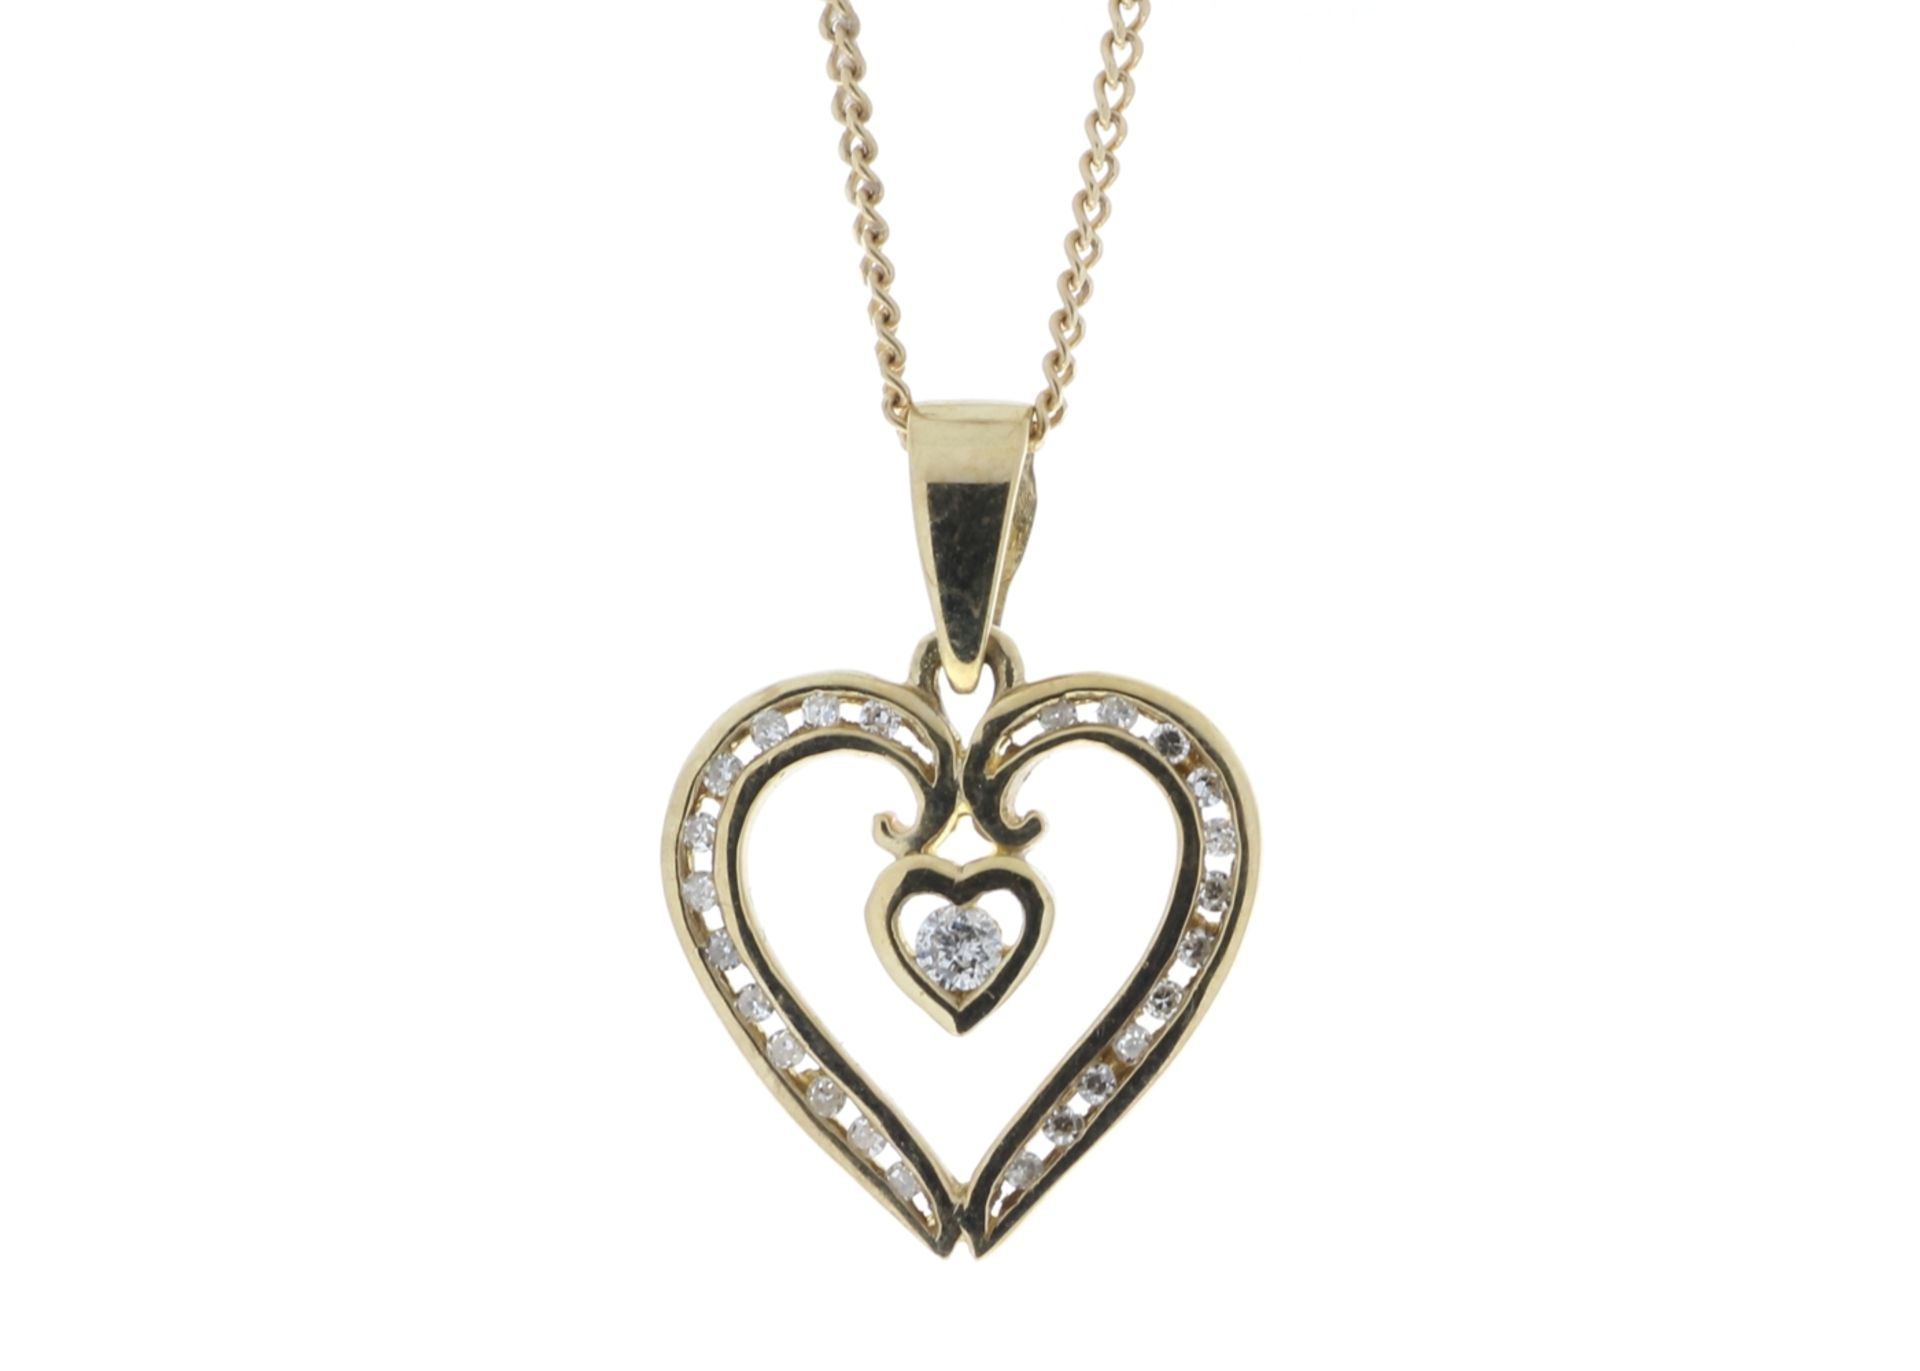 9ct Yellow Gold Heart Shaped Pendant Set With Diamonds 0.16 Carats - Valued by GIE £1,145.00 - 9ct